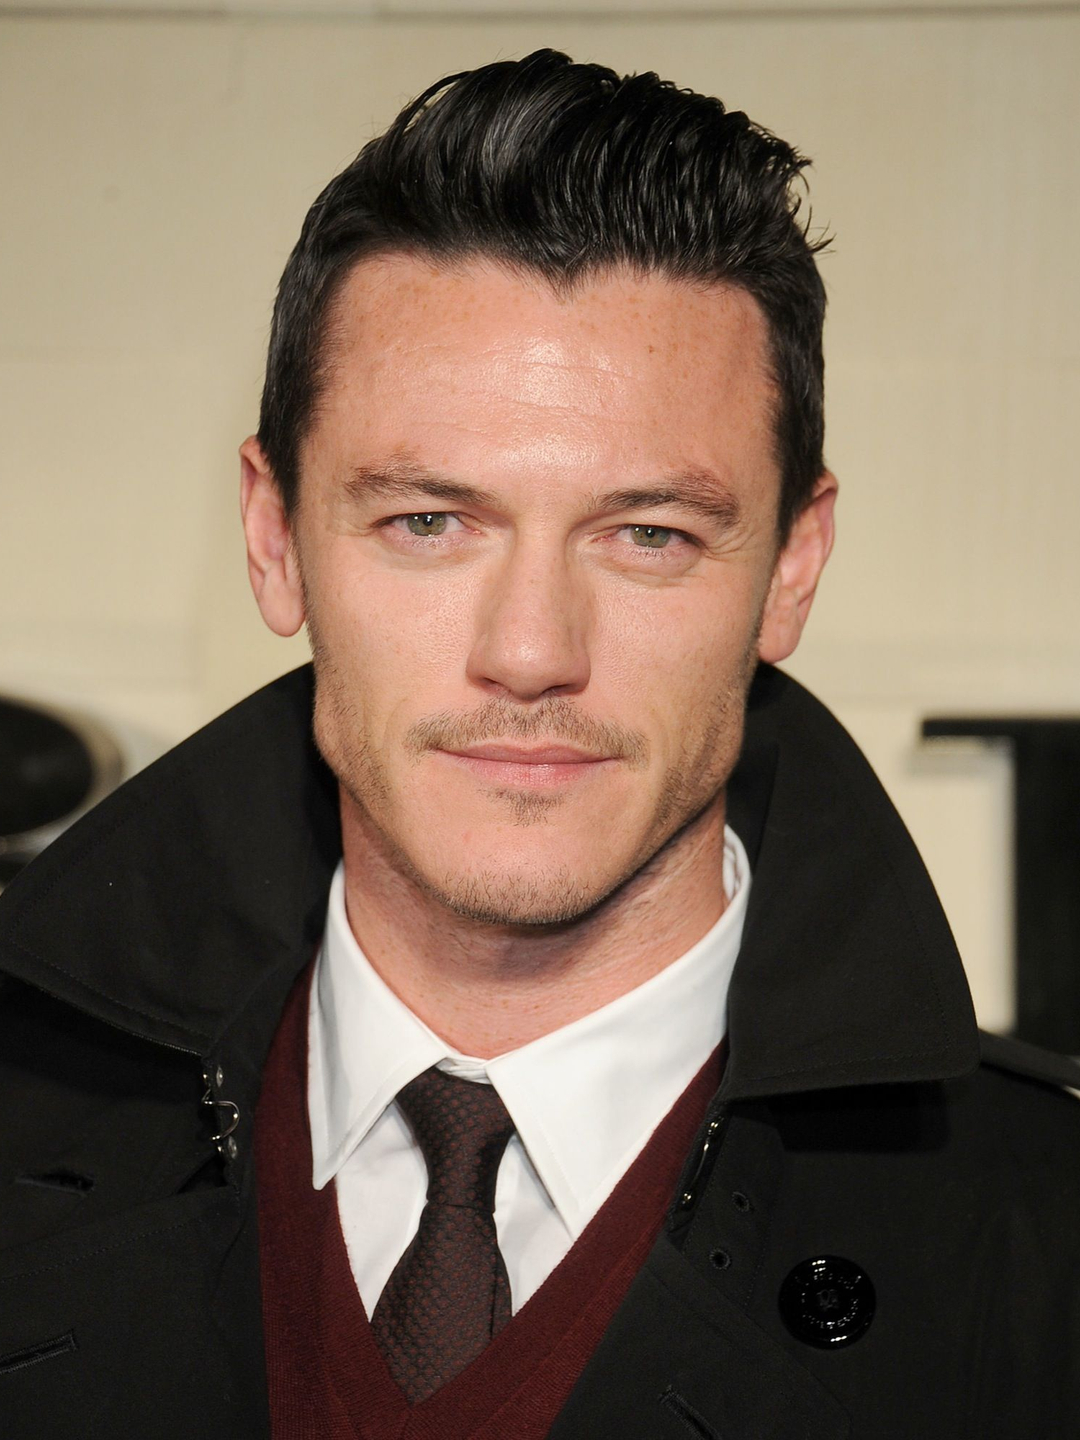 Luke Evans does he have a wife